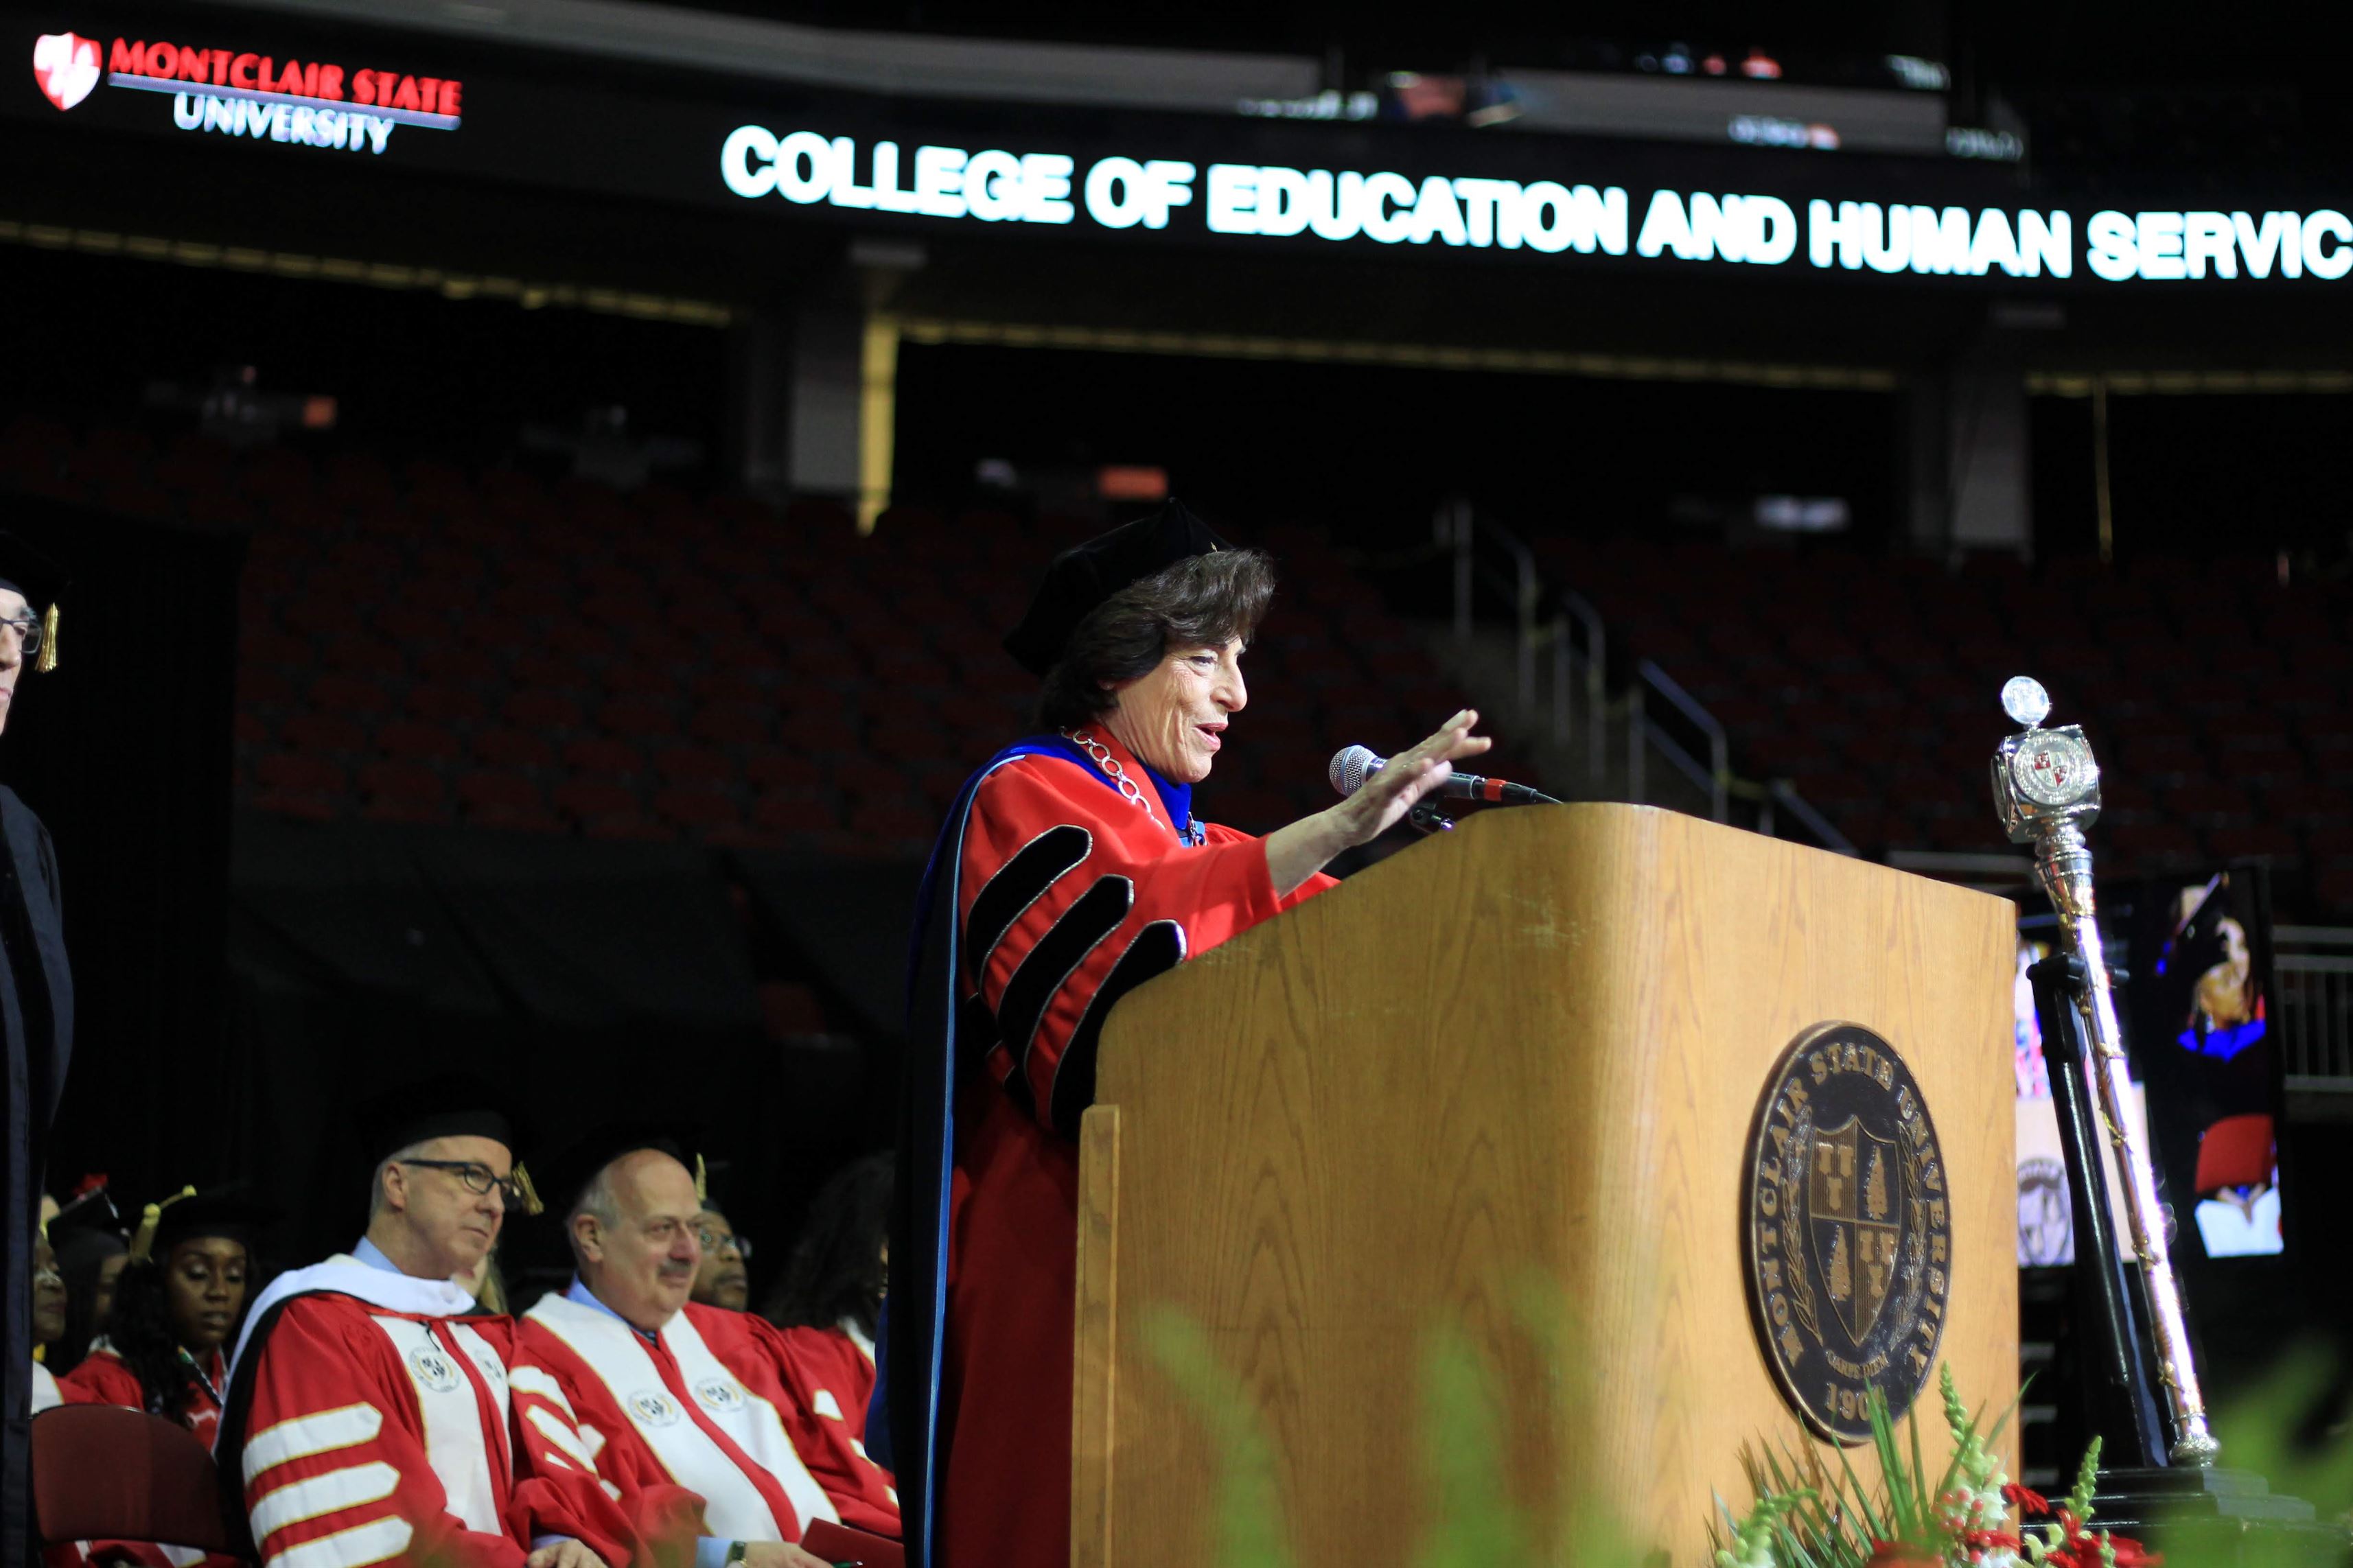 President Susan Cole Addressing the Class of 2019. Ben Caplan | The Montclarion